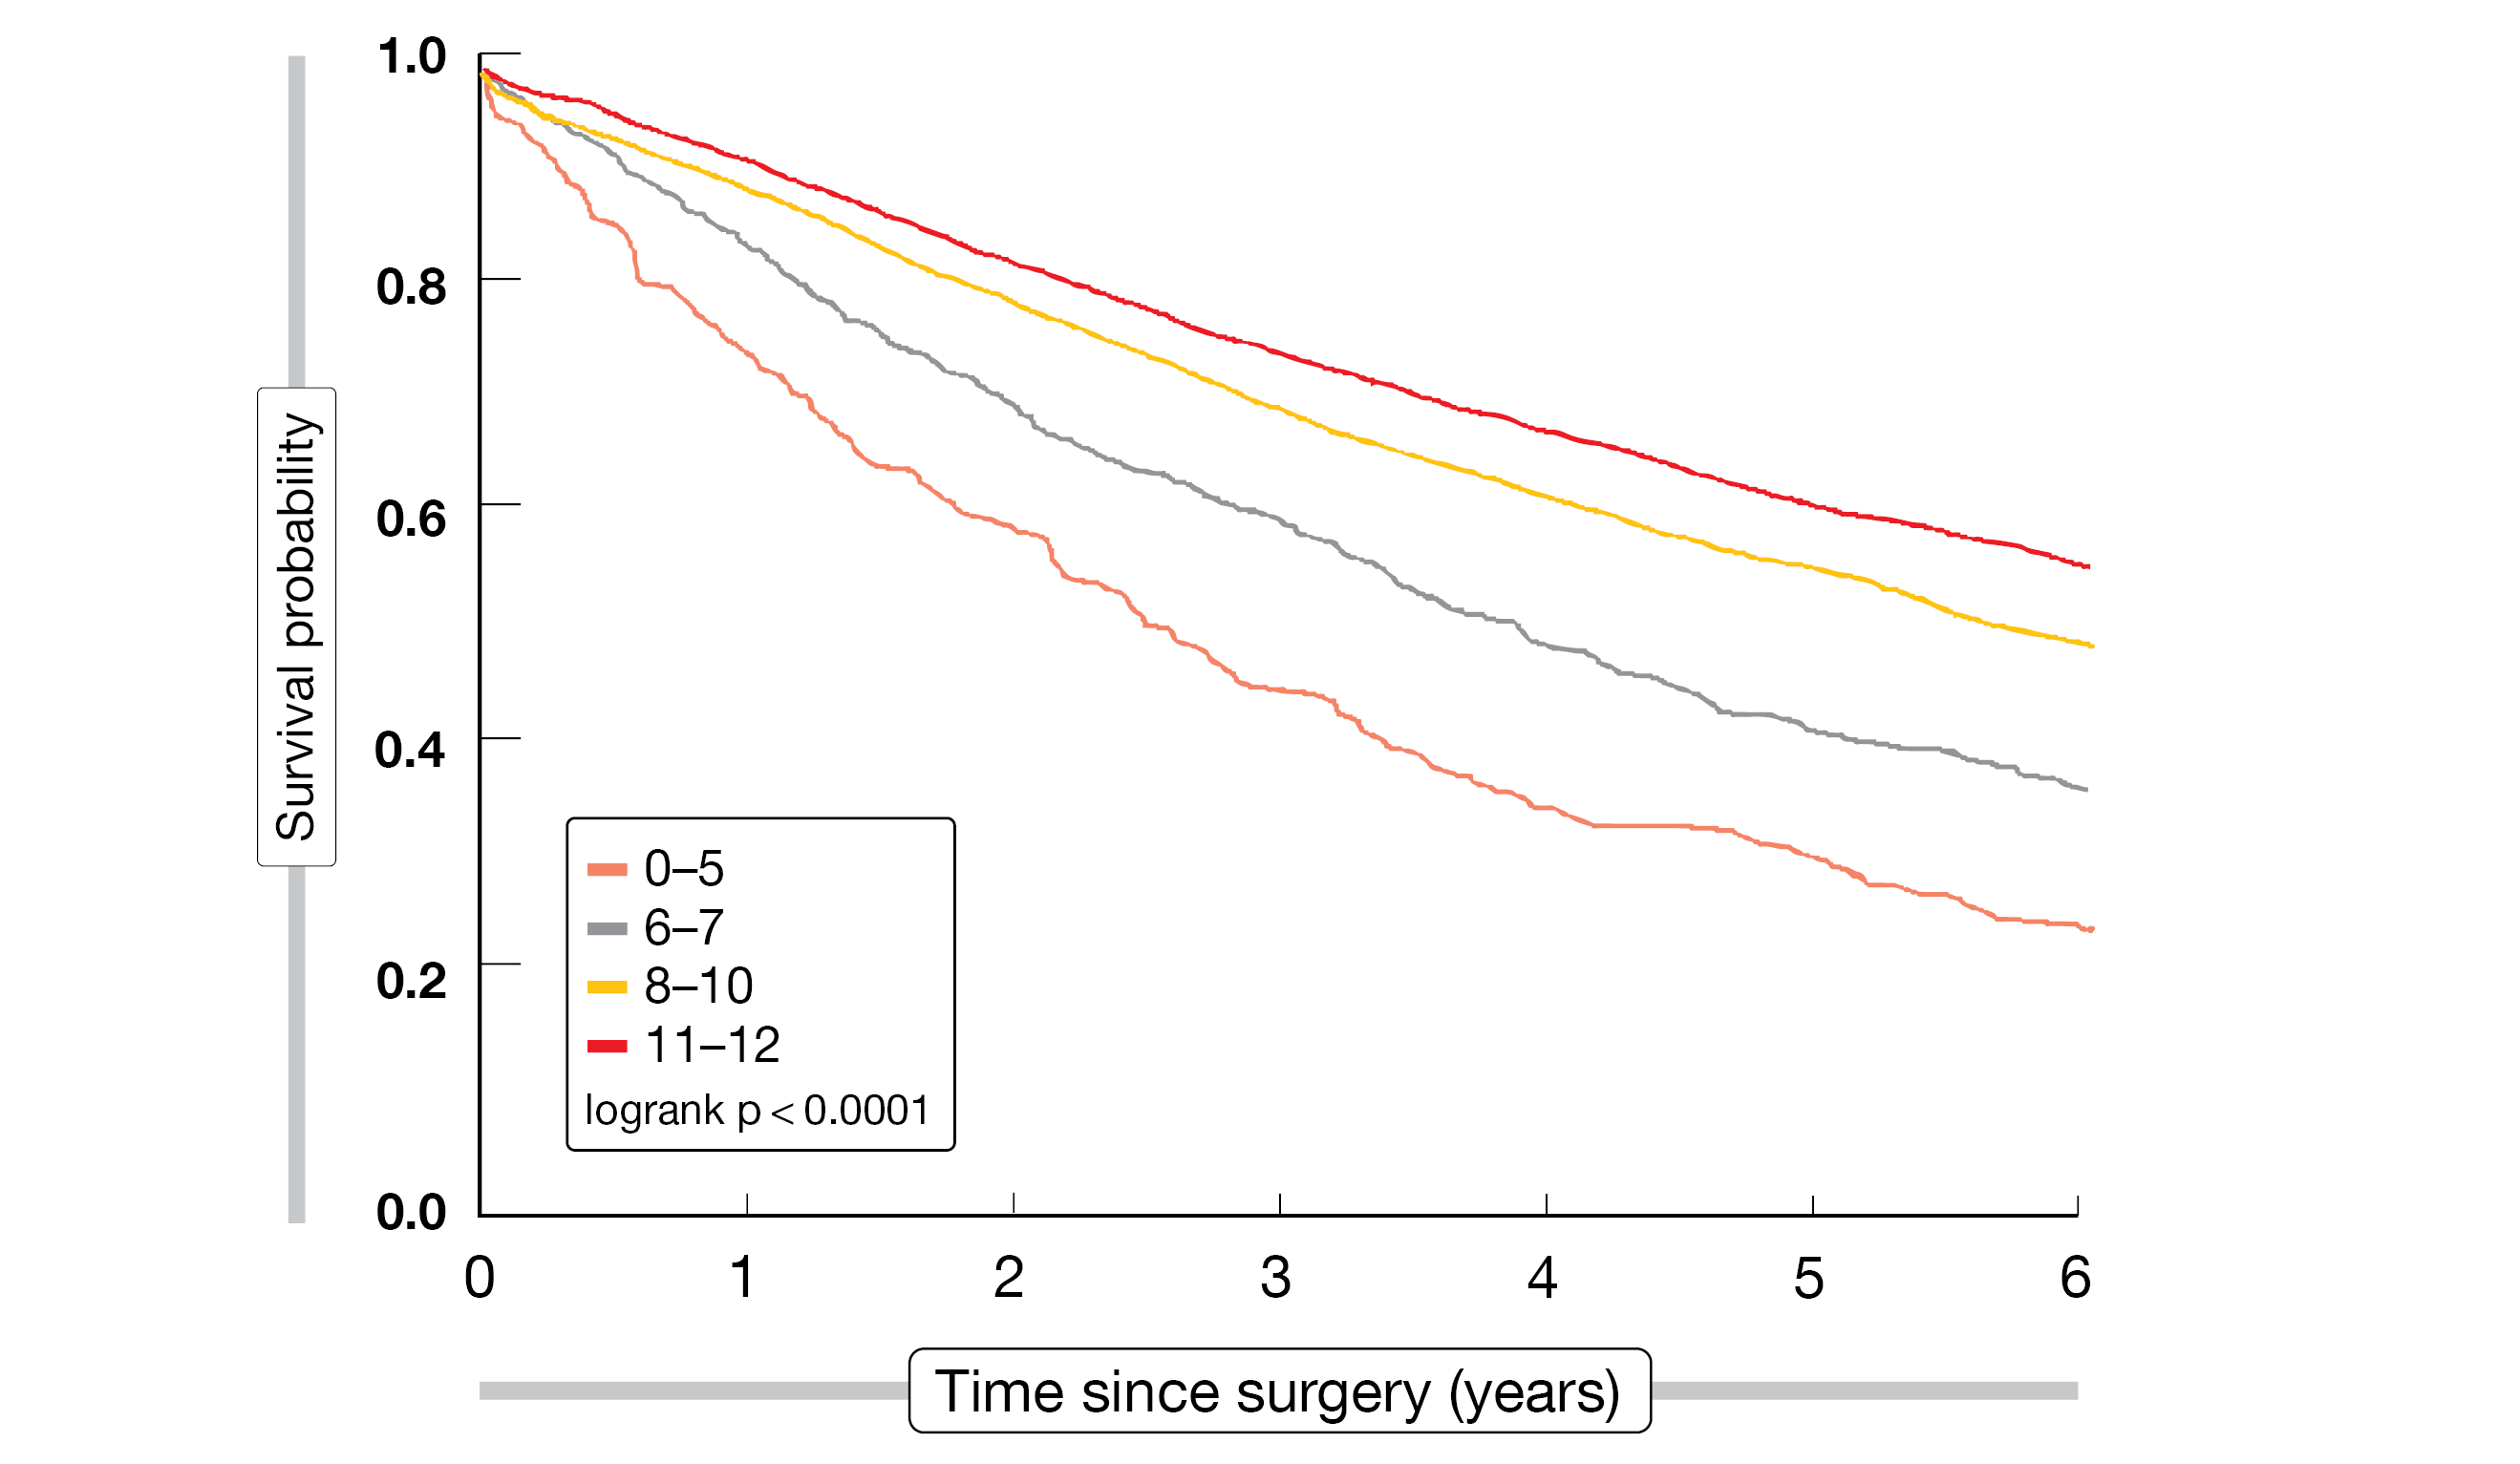 Figure 2: Overall survival outcomes after surgery according to VALCAN-O score categories